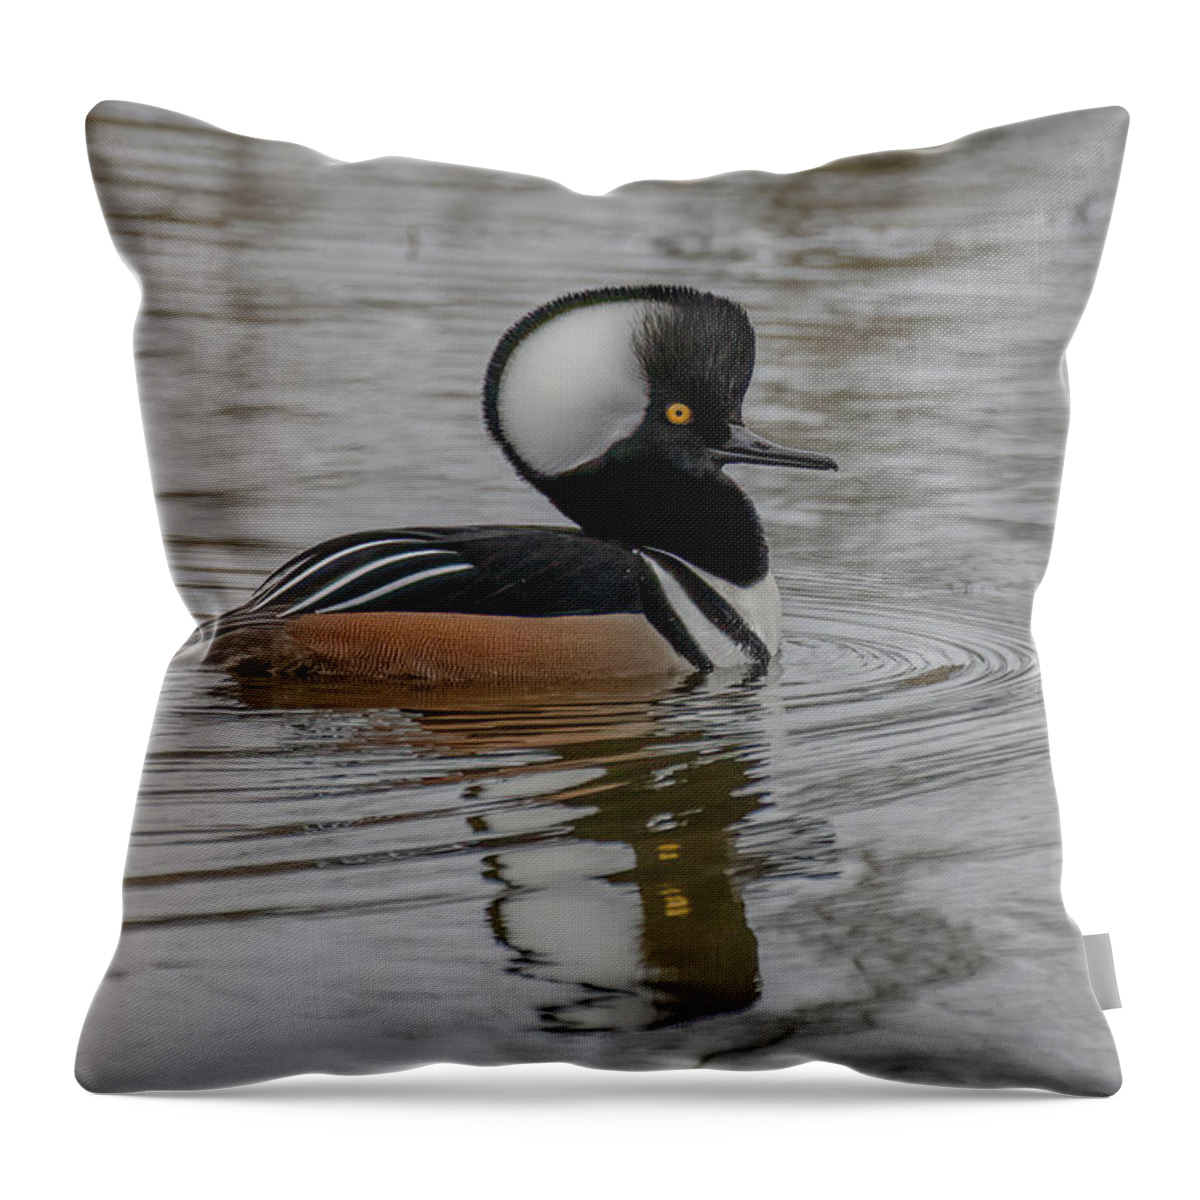 Hooded Merganser Throw Pillow featuring the photograph A Hoodie by Jerry Cahill